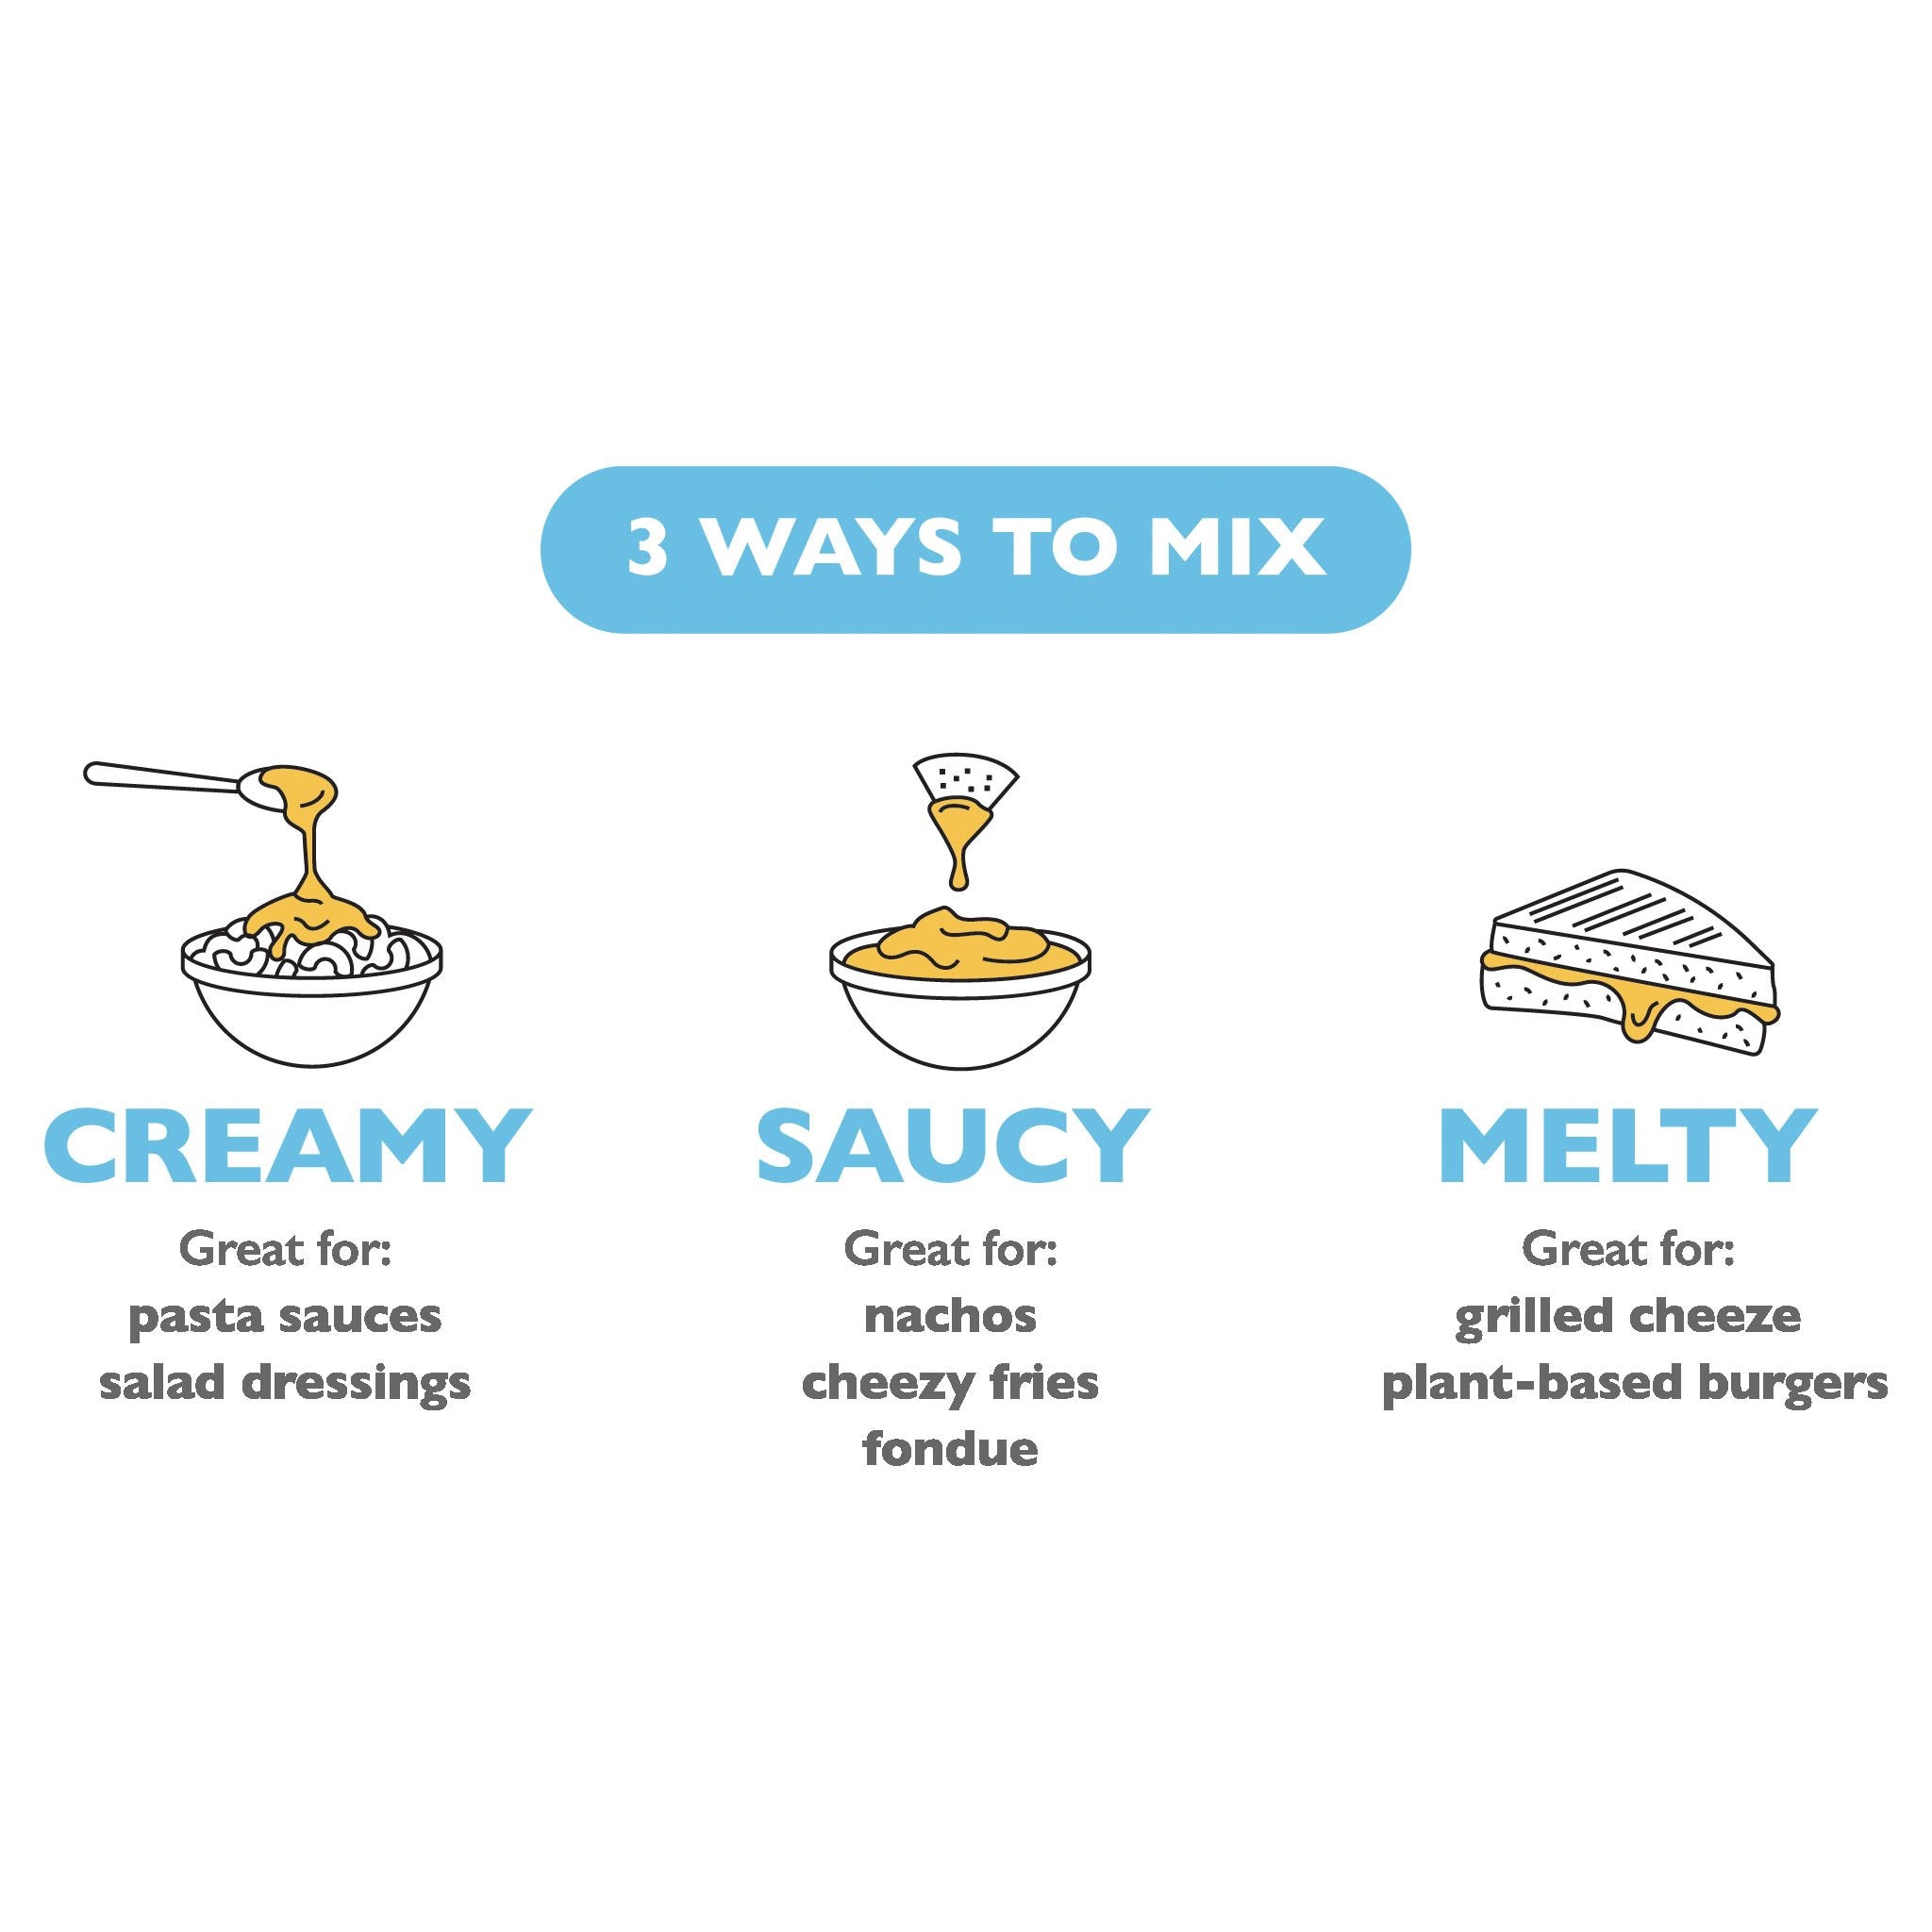 Mix the sauce your way to create a variety of receipes